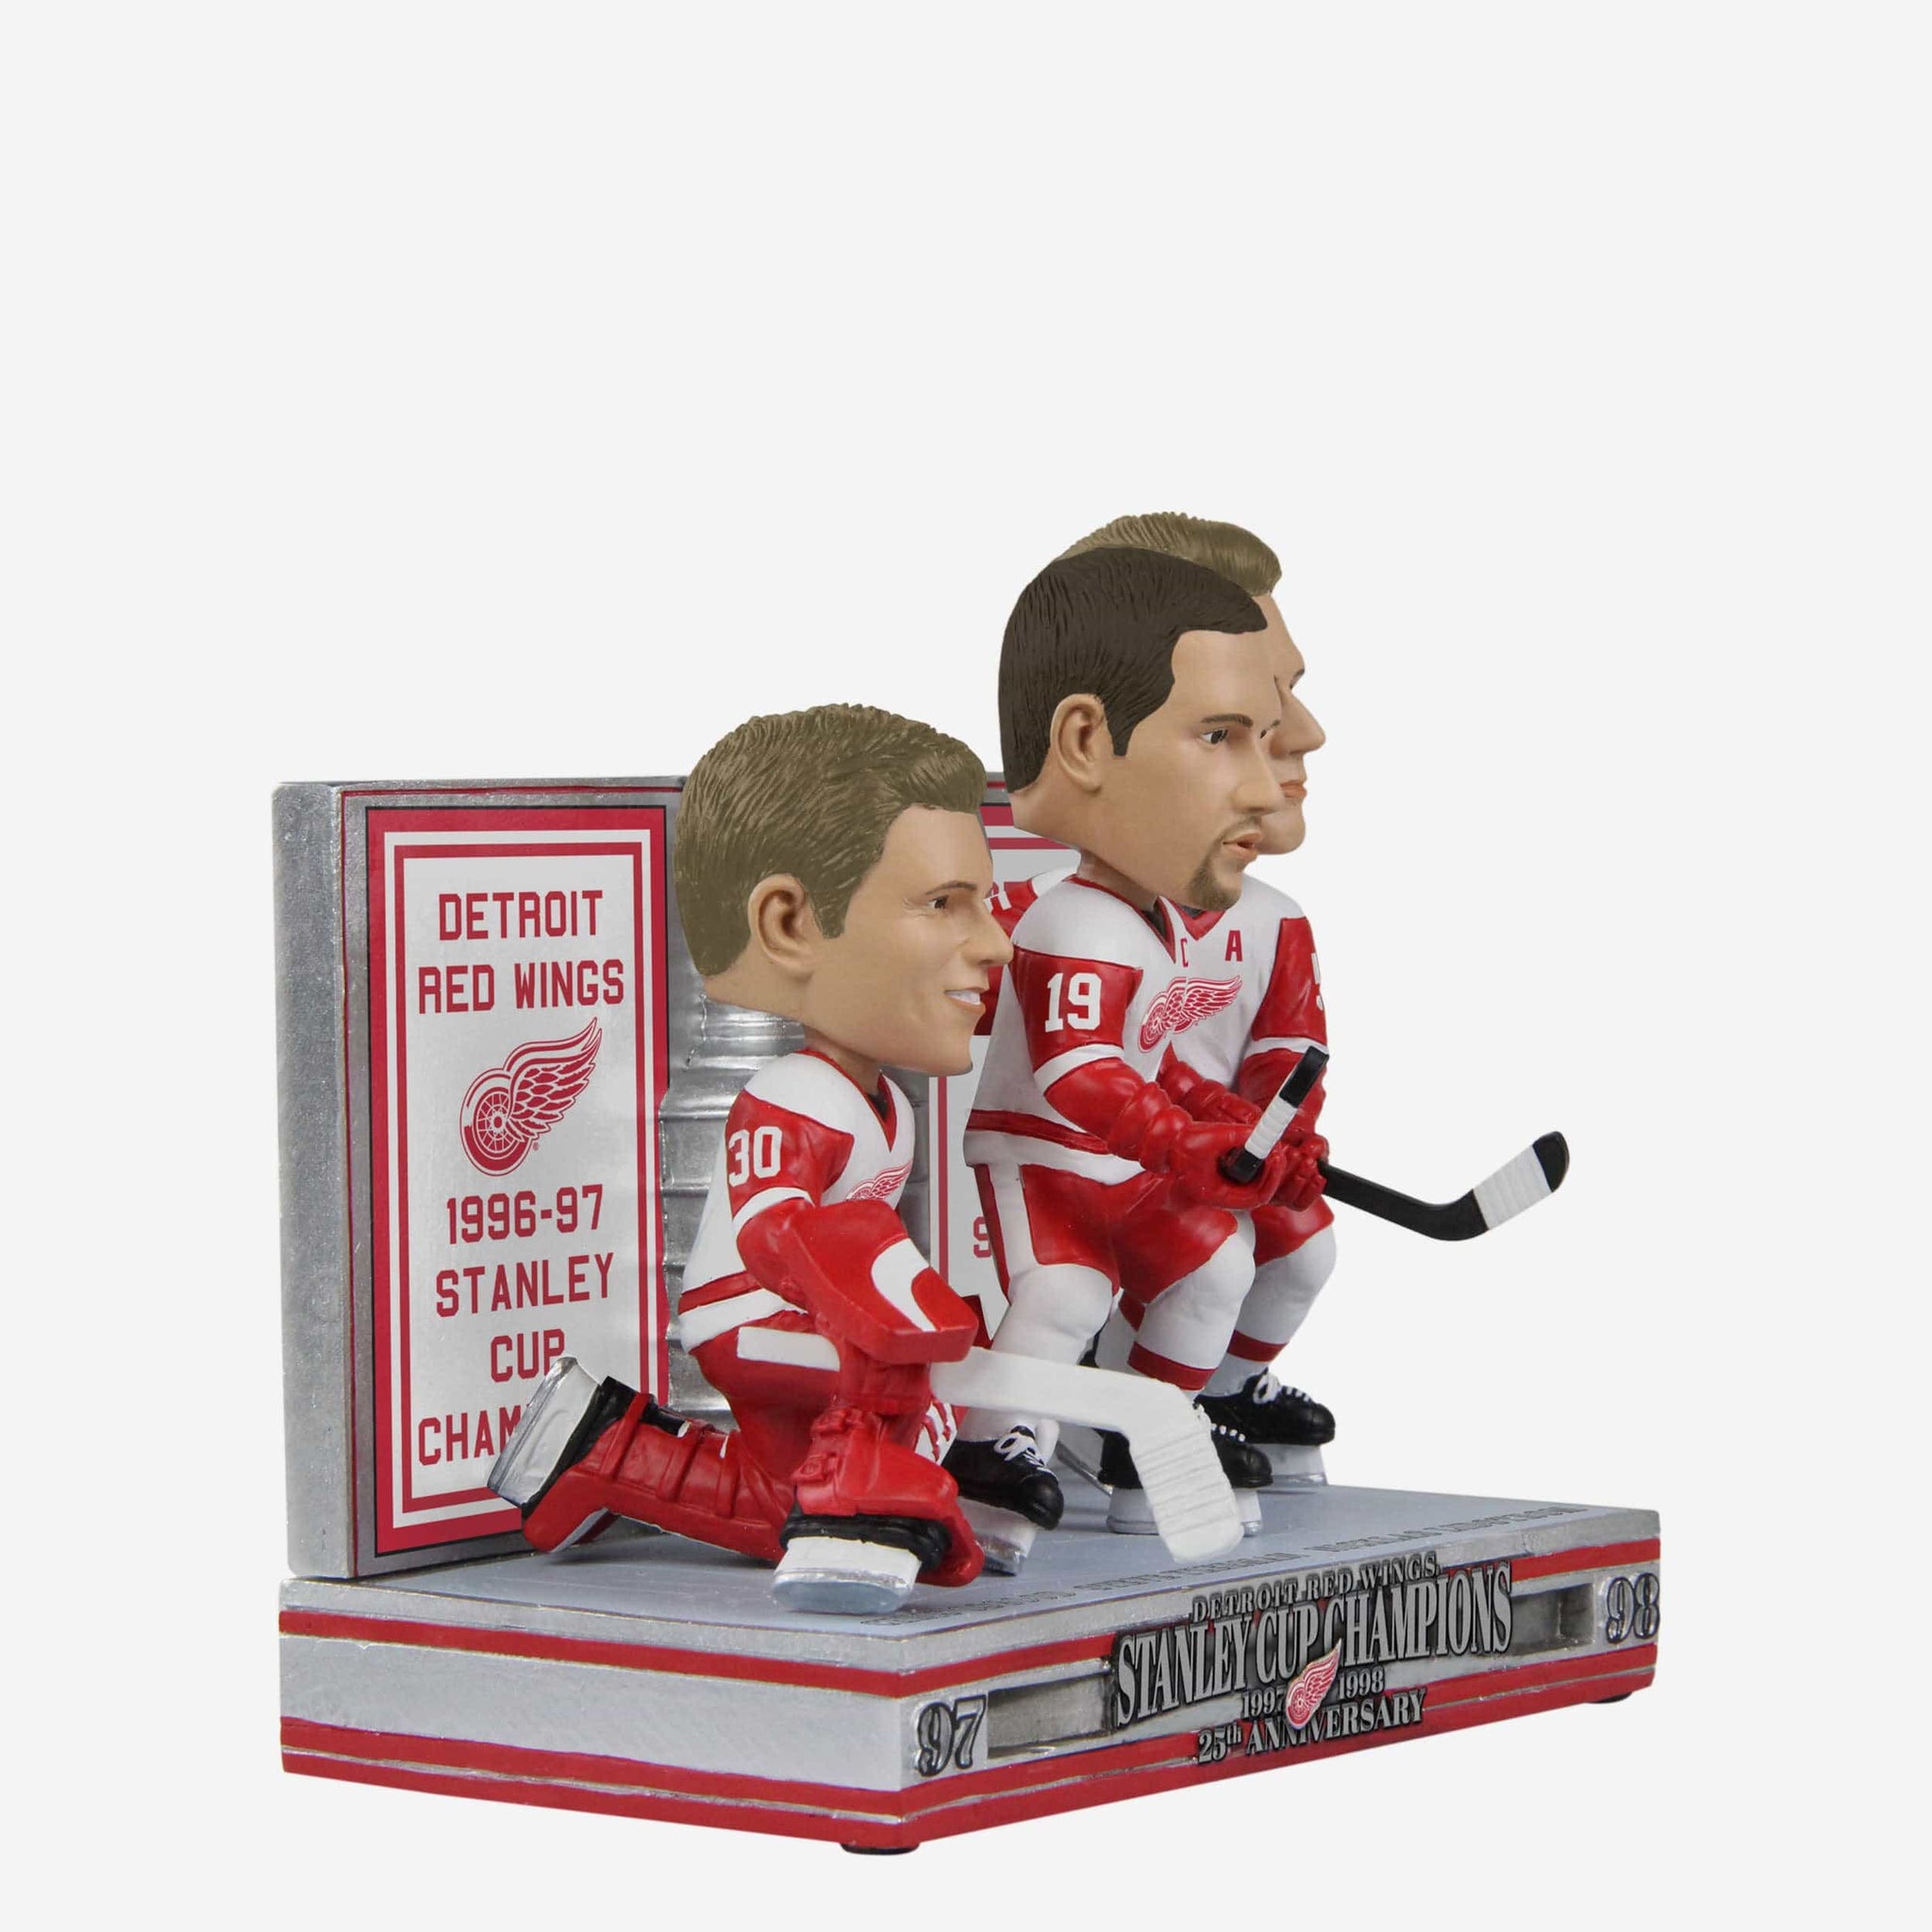 DETROIT RED WINGS STANLEY CUP MINI TROPHY NHL HOCKEY SPORT COLLECTOR  CHAMPIONS